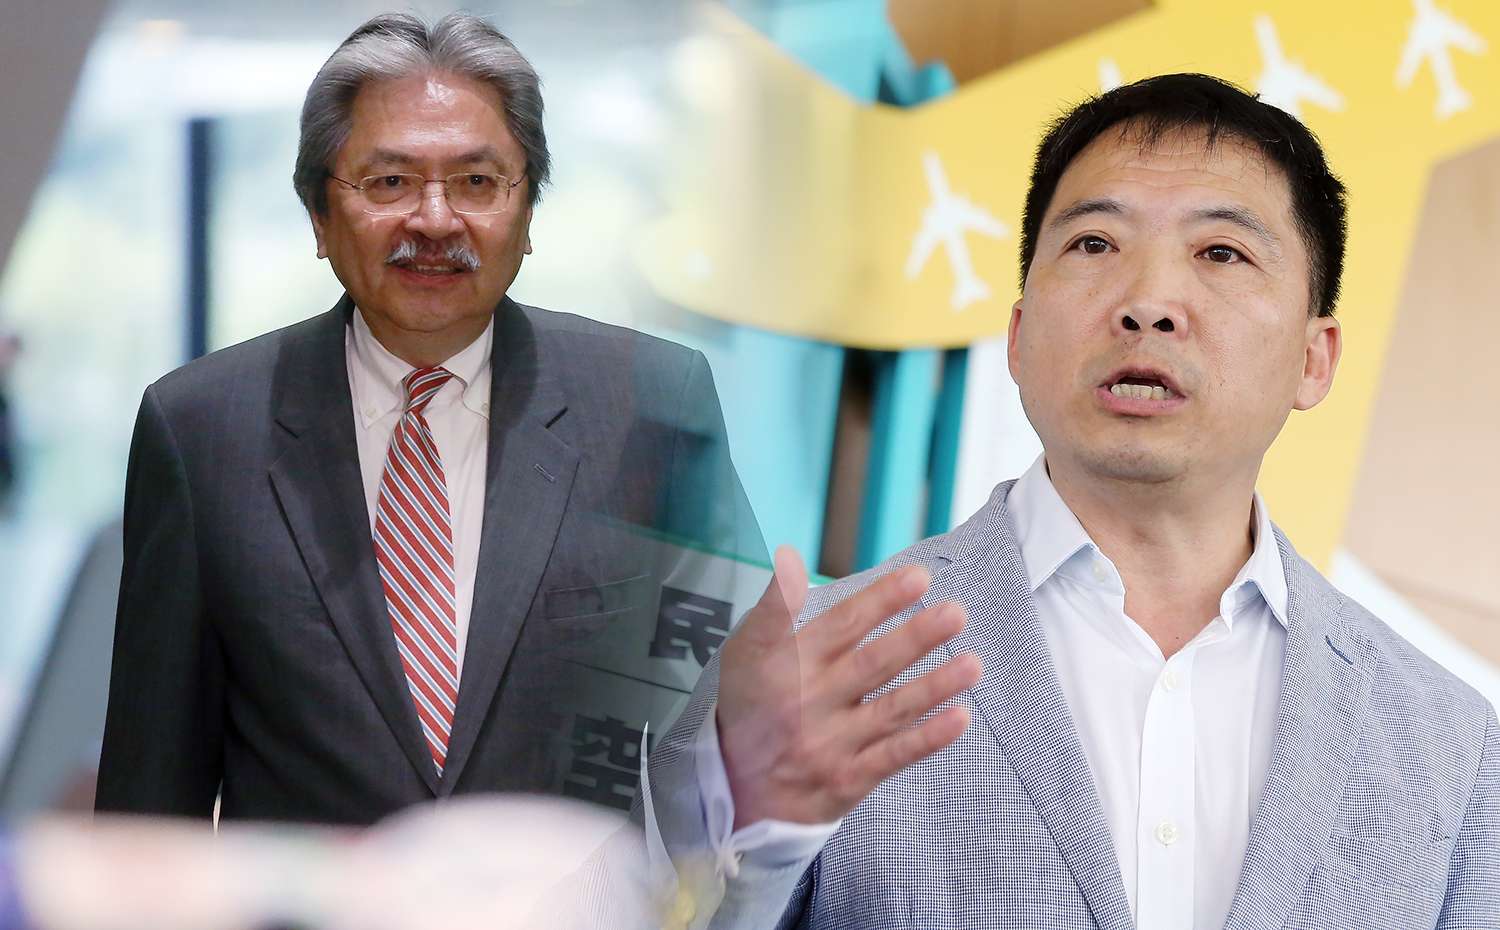 Democratic Party lawmaker Wu Chi-wai (right) said Financial Secretary John Tsang (left) had adopted the right approach in addressing social conflicts in the city. Photos: Dickson Lee, K.Y. Cheng